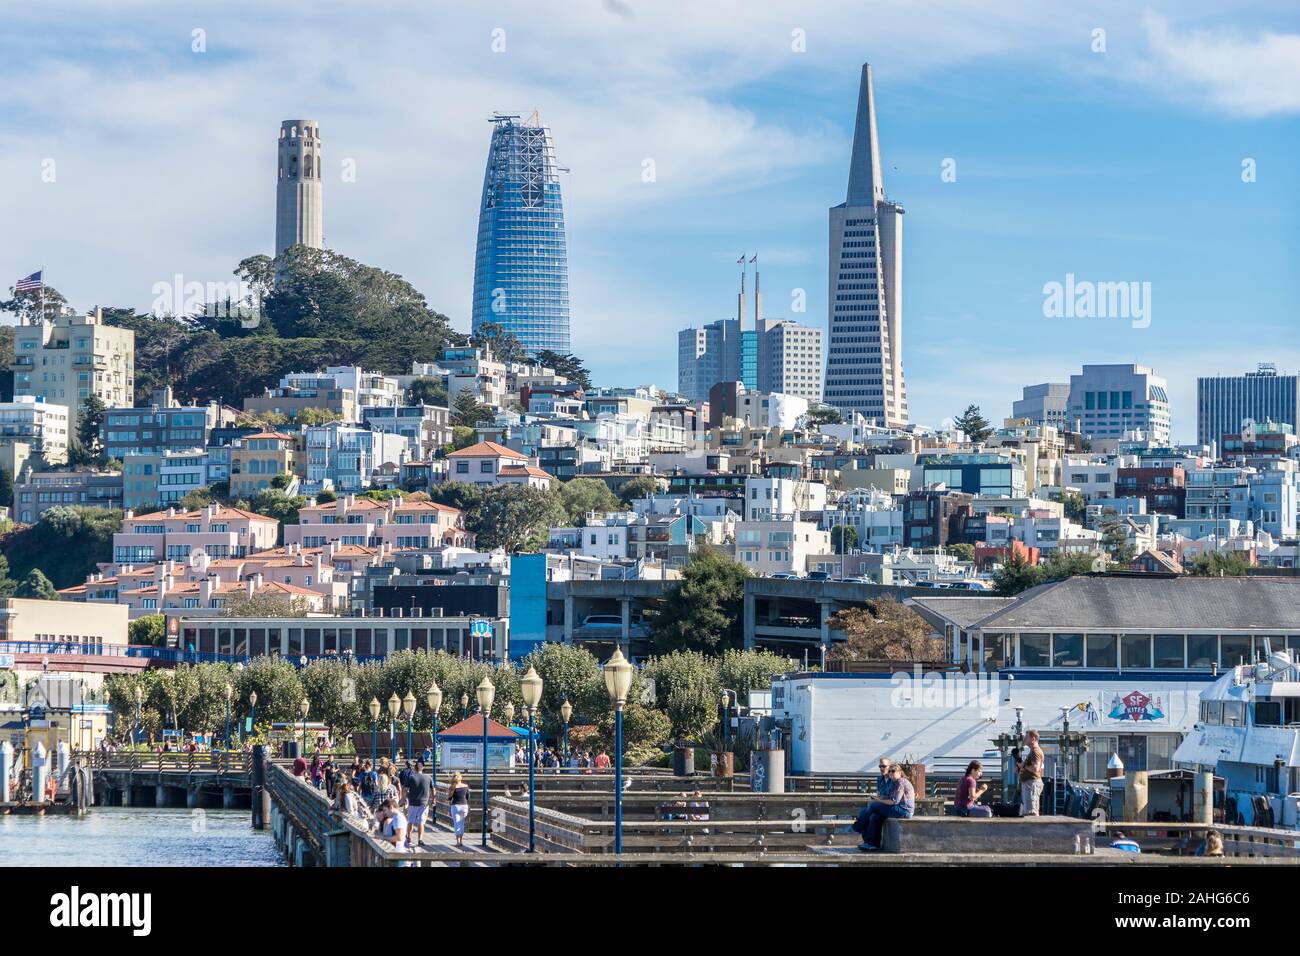 San Francisco cityscape view from the Bay, including the pier, Coit Tower, the Transamerica Pyramid, and Salesforce Tower still under construction Stock Photo